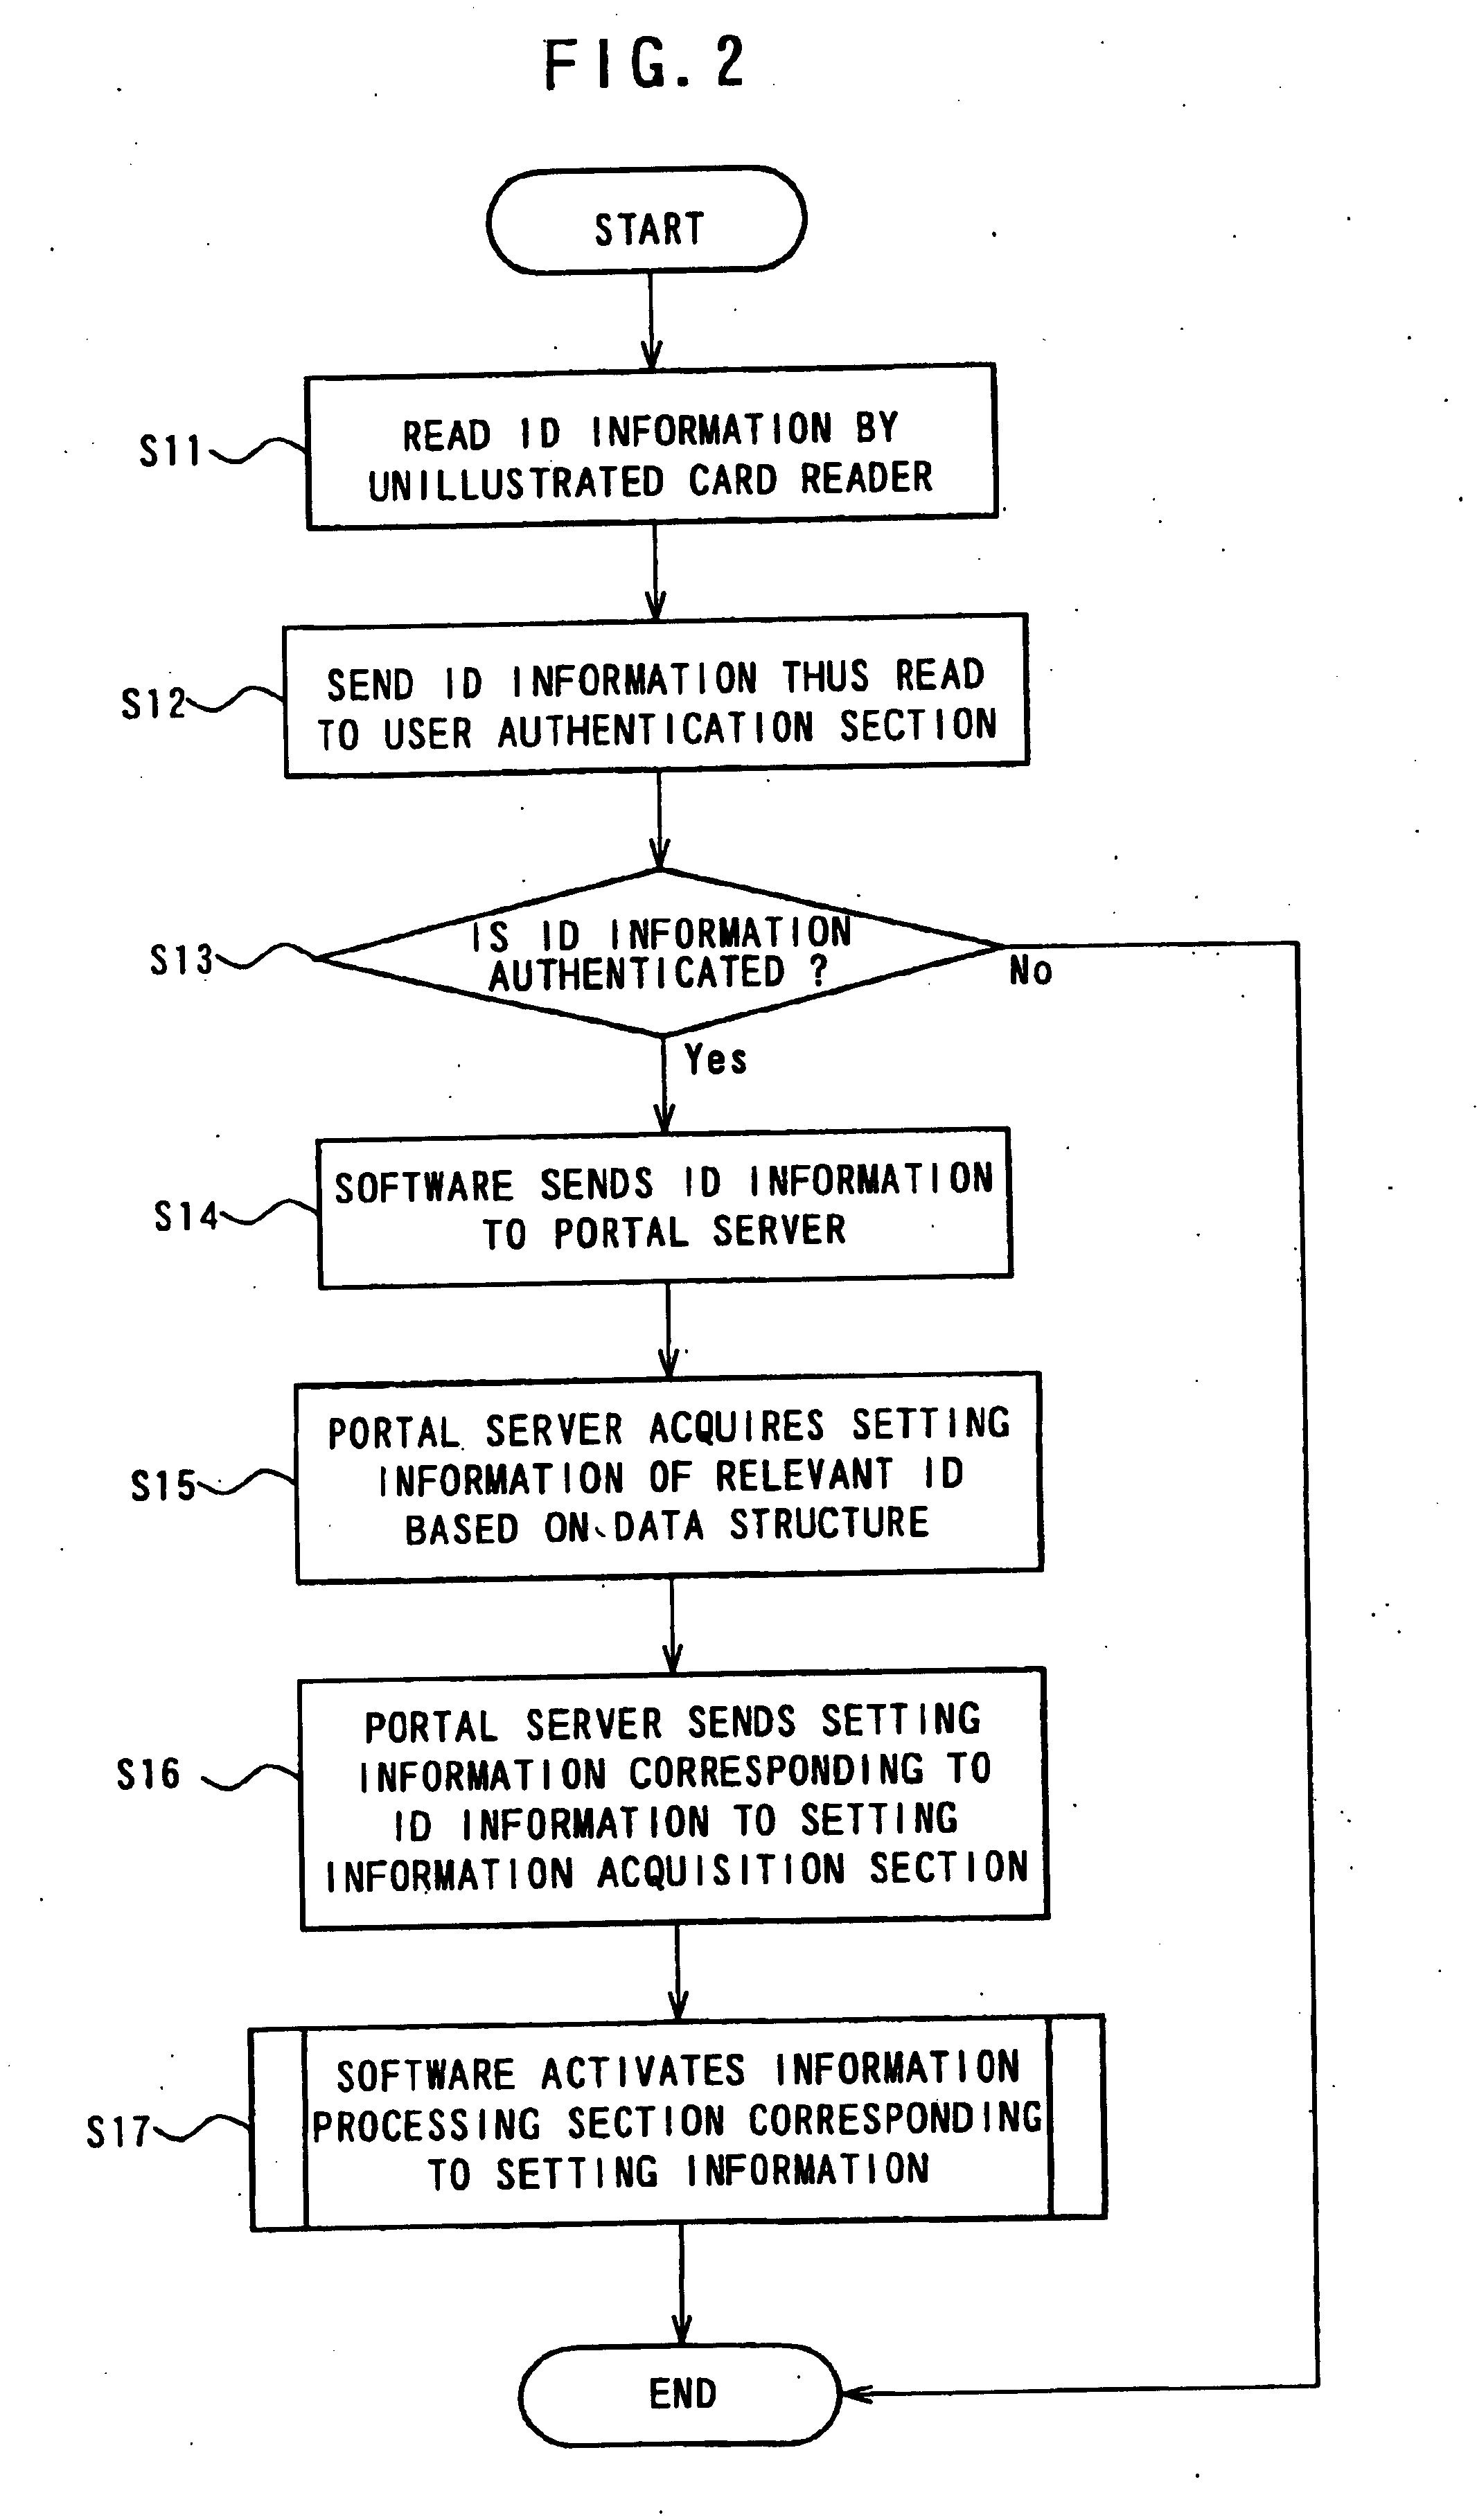 Image processing apparatus and personal information management program